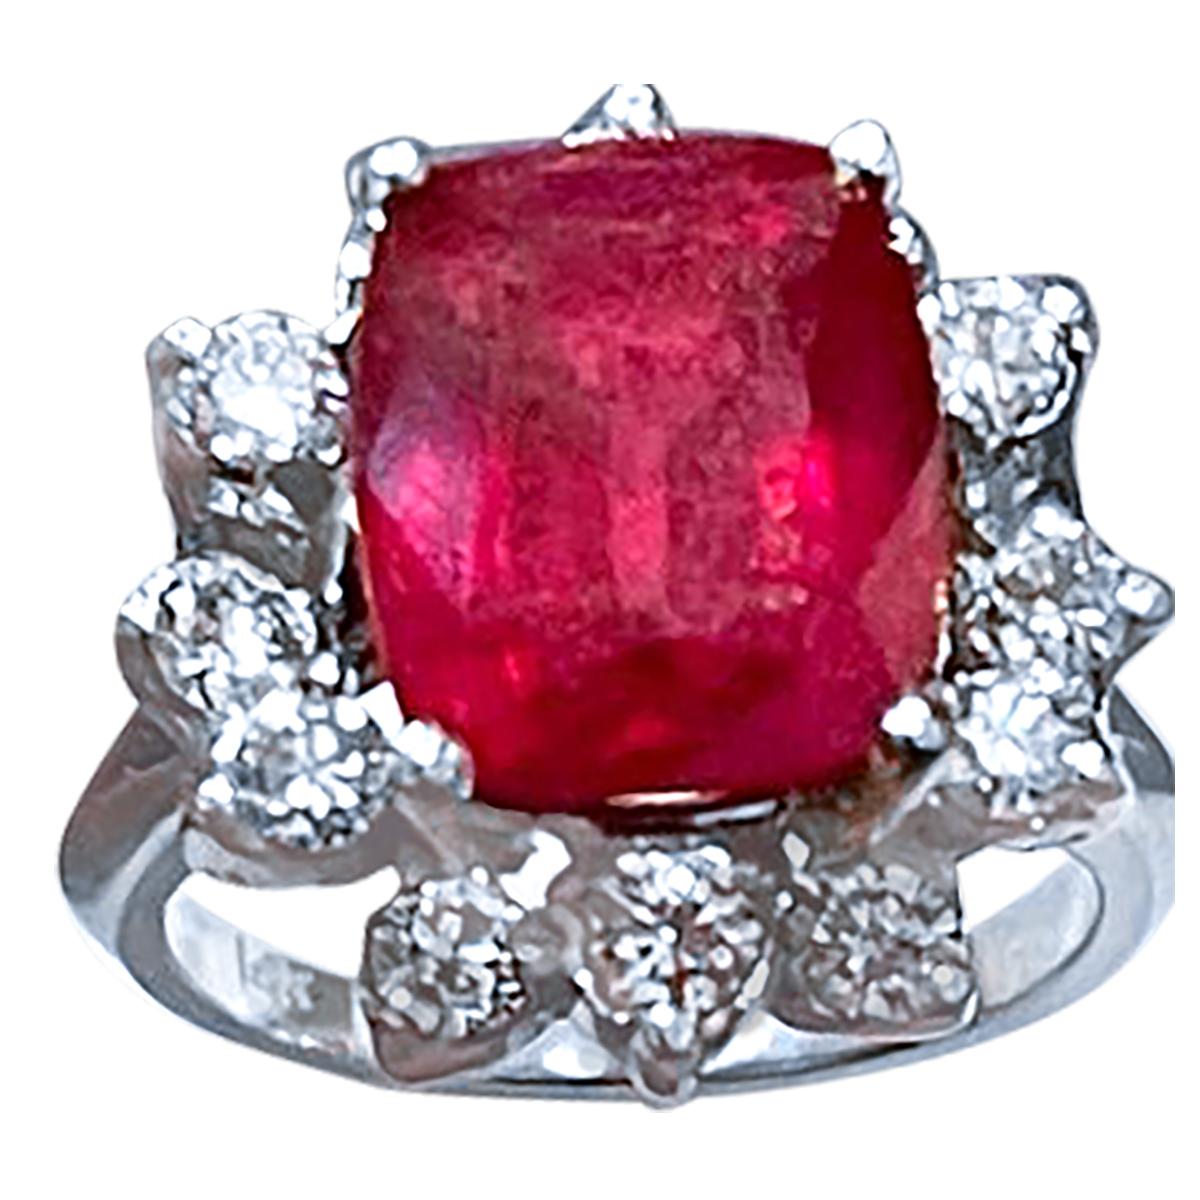 4 Carat Cushion Shape Treated Ruby and Diamond 14 Karat White Gold Ring Size 4.5
 prong set
14 K White Gold: 6.4  gram
Stamped 14K
Ring Size 4.5 ( can be altered for no charge )
Large approximately 4  carat Cushion shape ruby Treated surrounded by